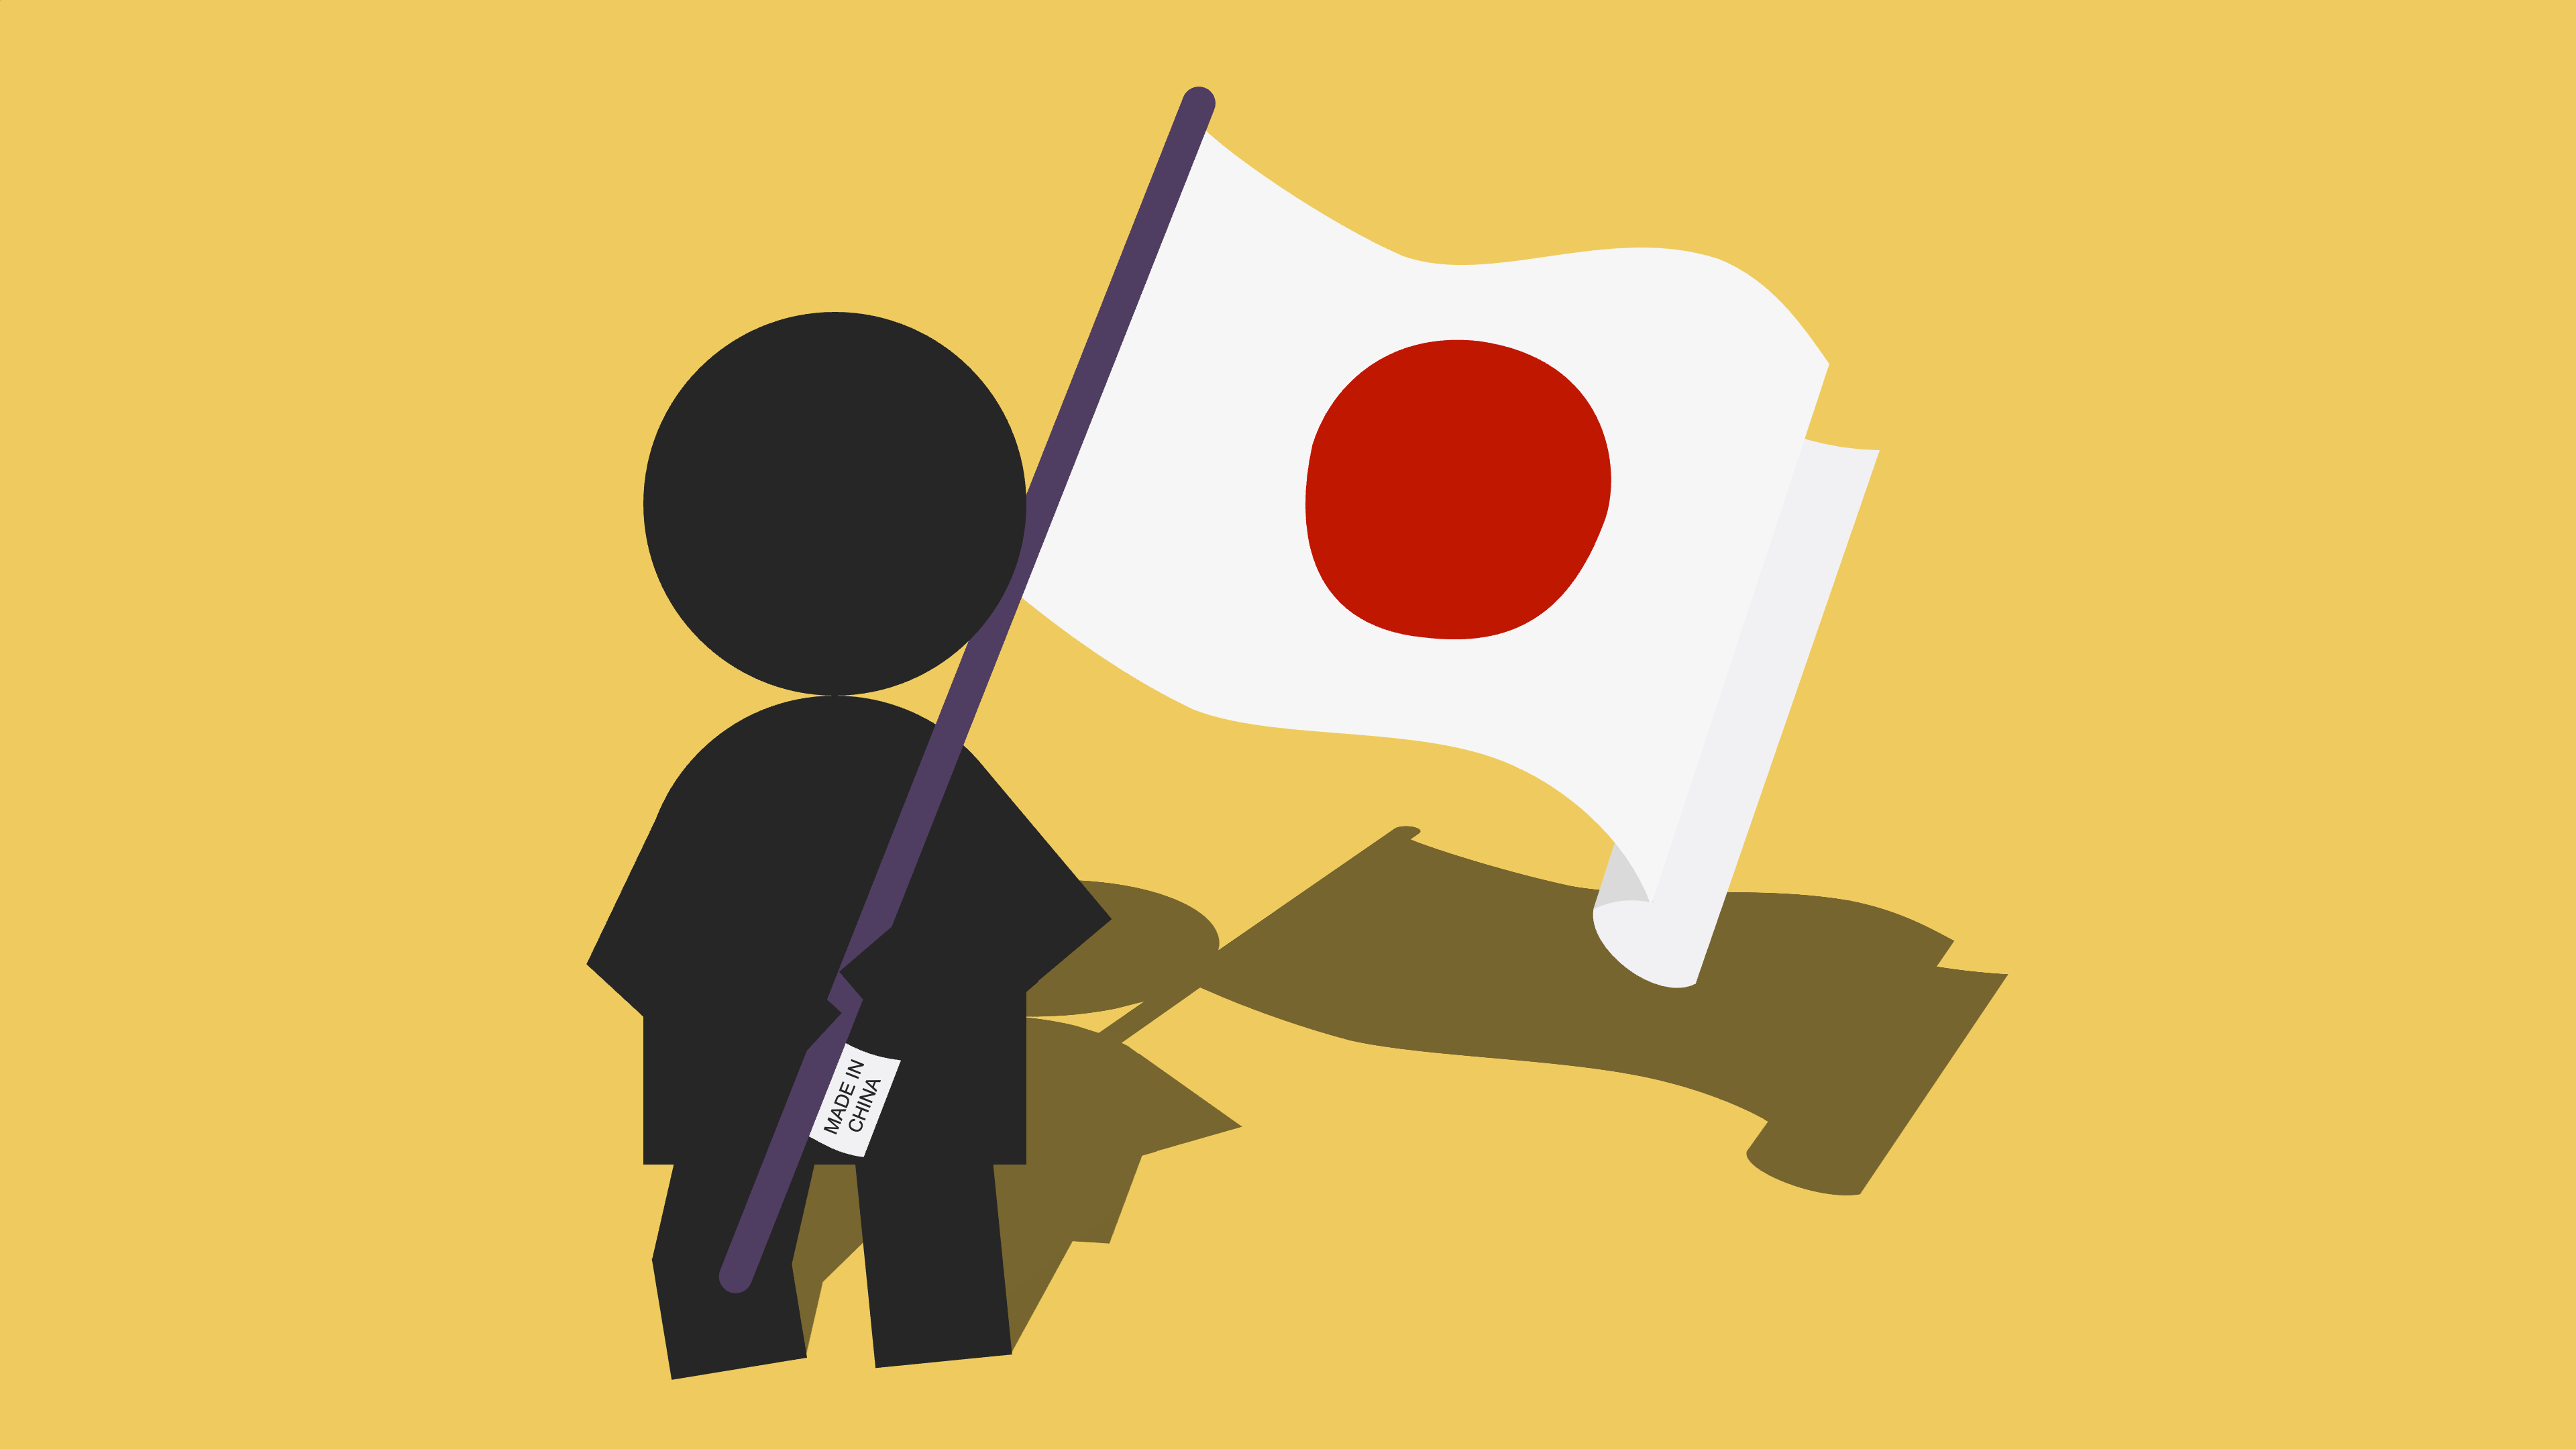 A person carries a Japanese flag that was made in China